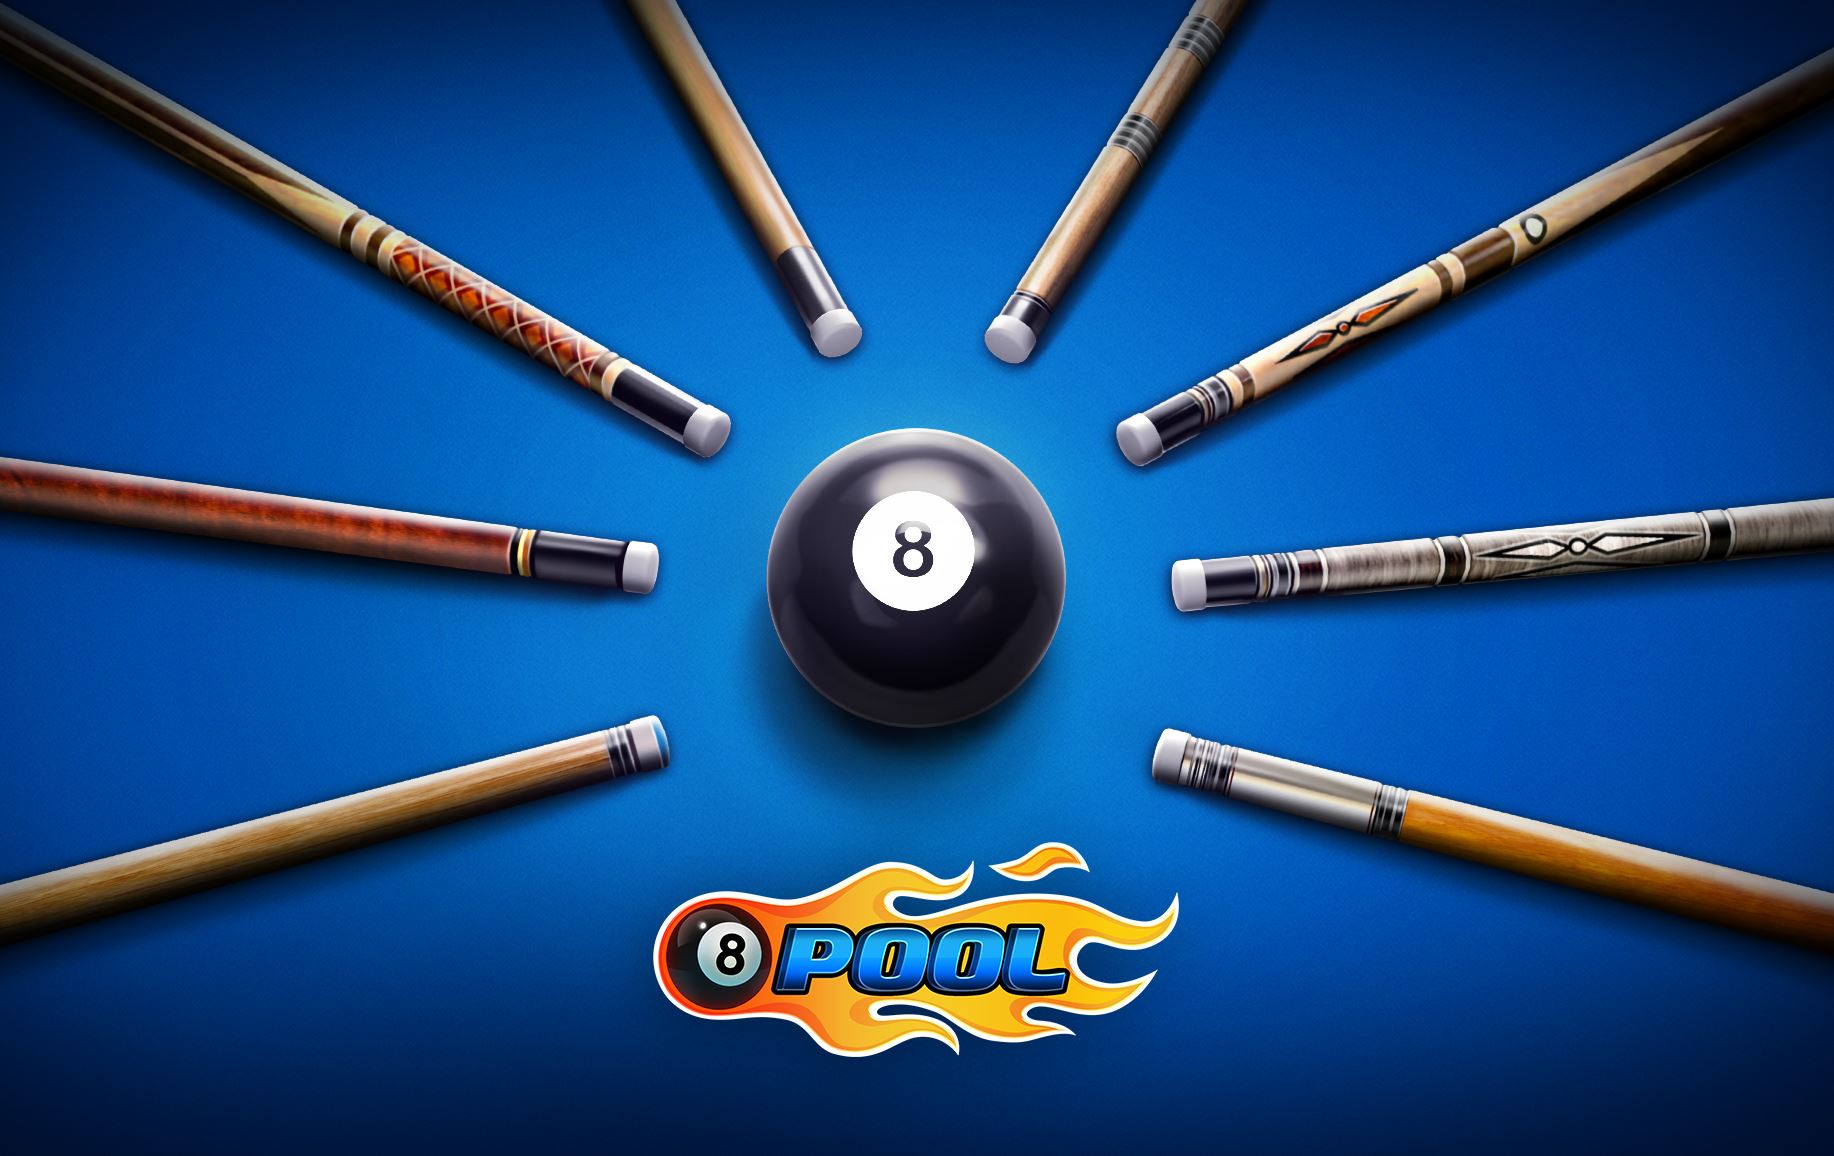 Miniclips 8 Ball Pool Announces Charity Partnership  Future of the Force